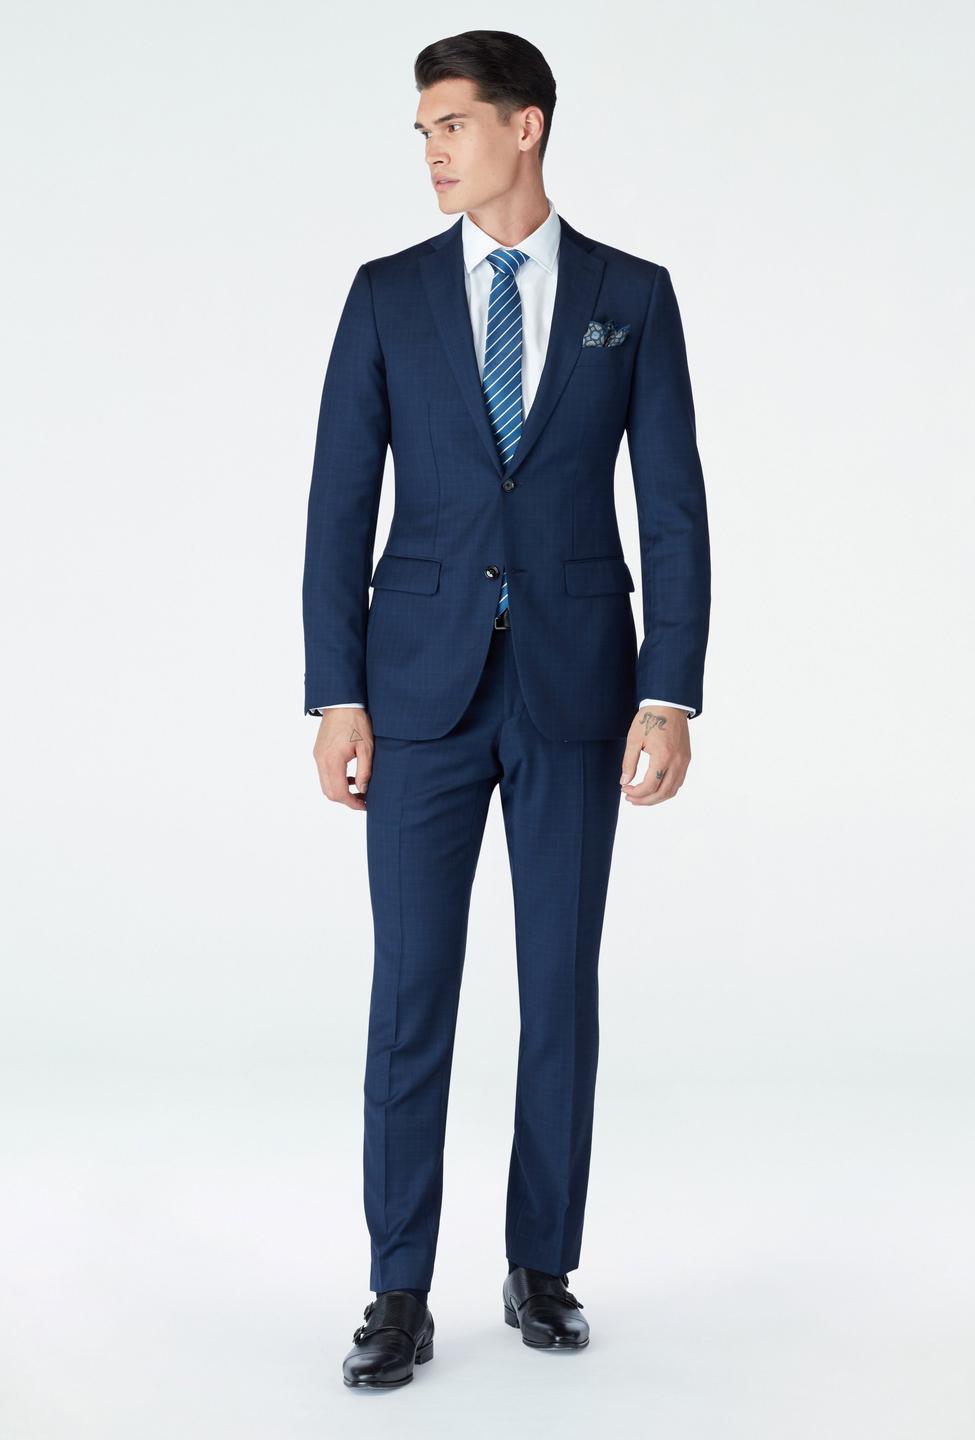 Blue suit - Harrogate Checked Design from Luxury Indochino Collection